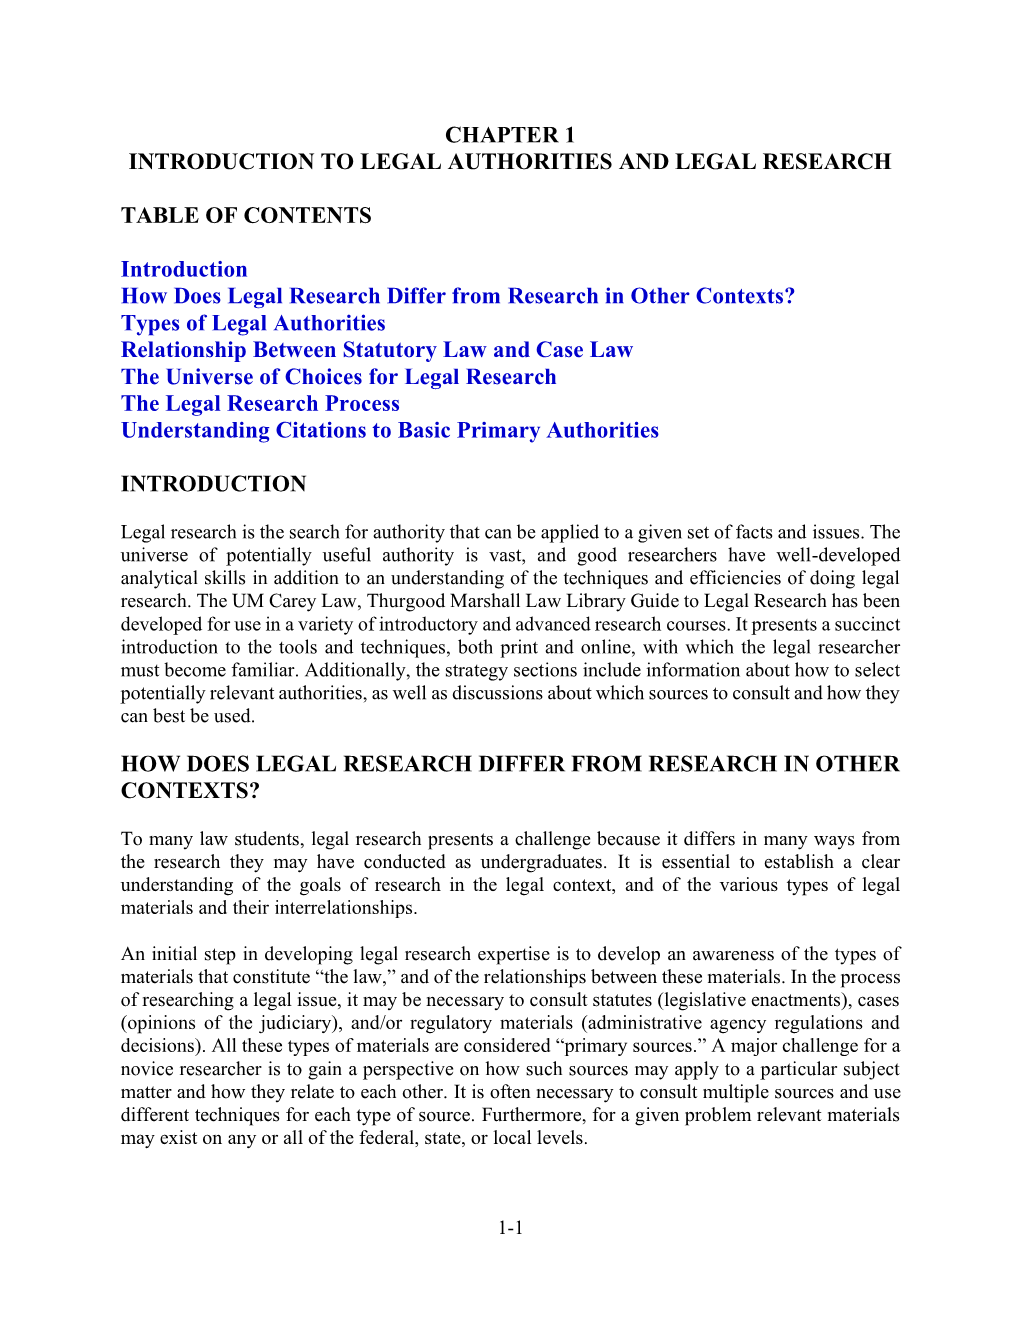 Chapter 1 Introduction to Legal Authorities and Legal Research